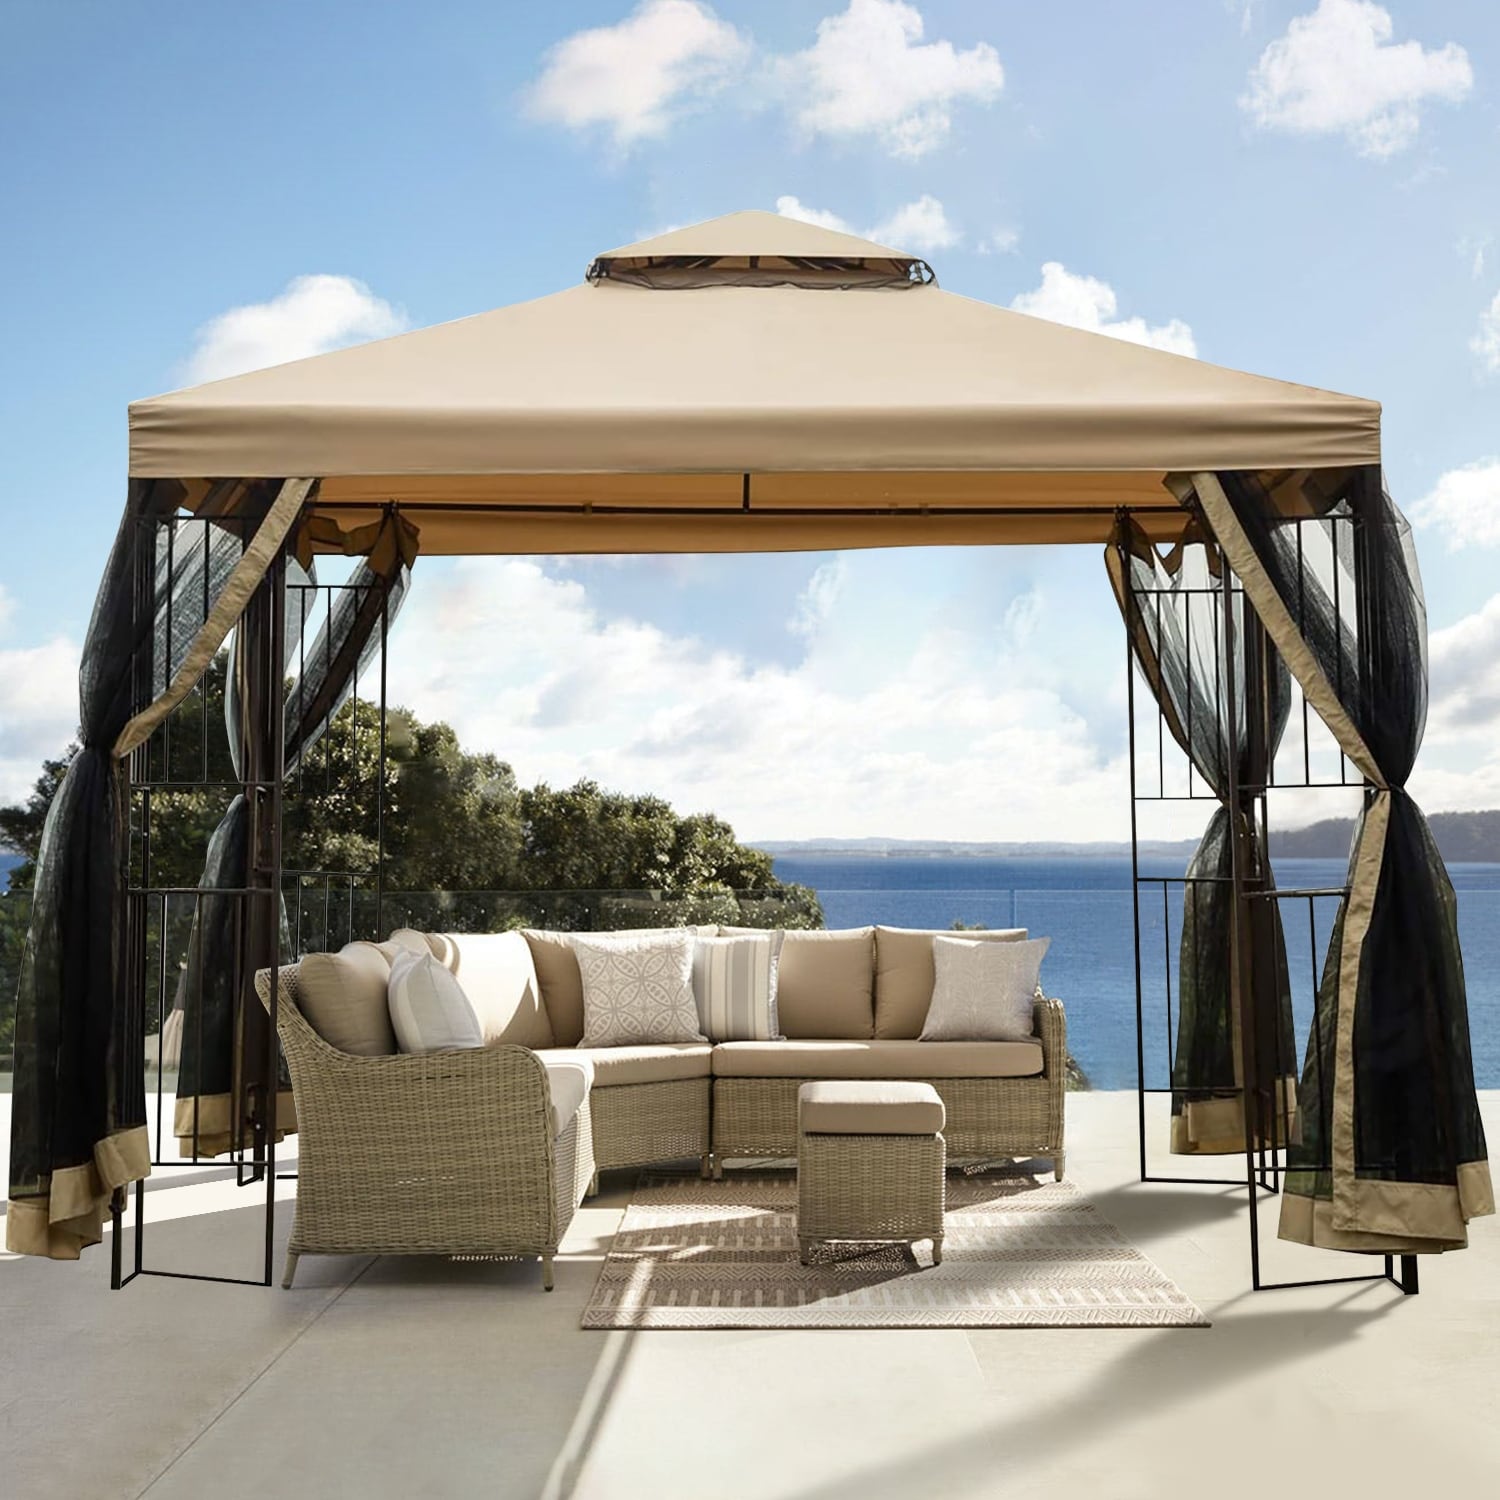 Coastshade Gazebo Privacy Panel Curtain Side Wall Sun Shelter for 10x10,1 Pack Only, 10x10, Khaki